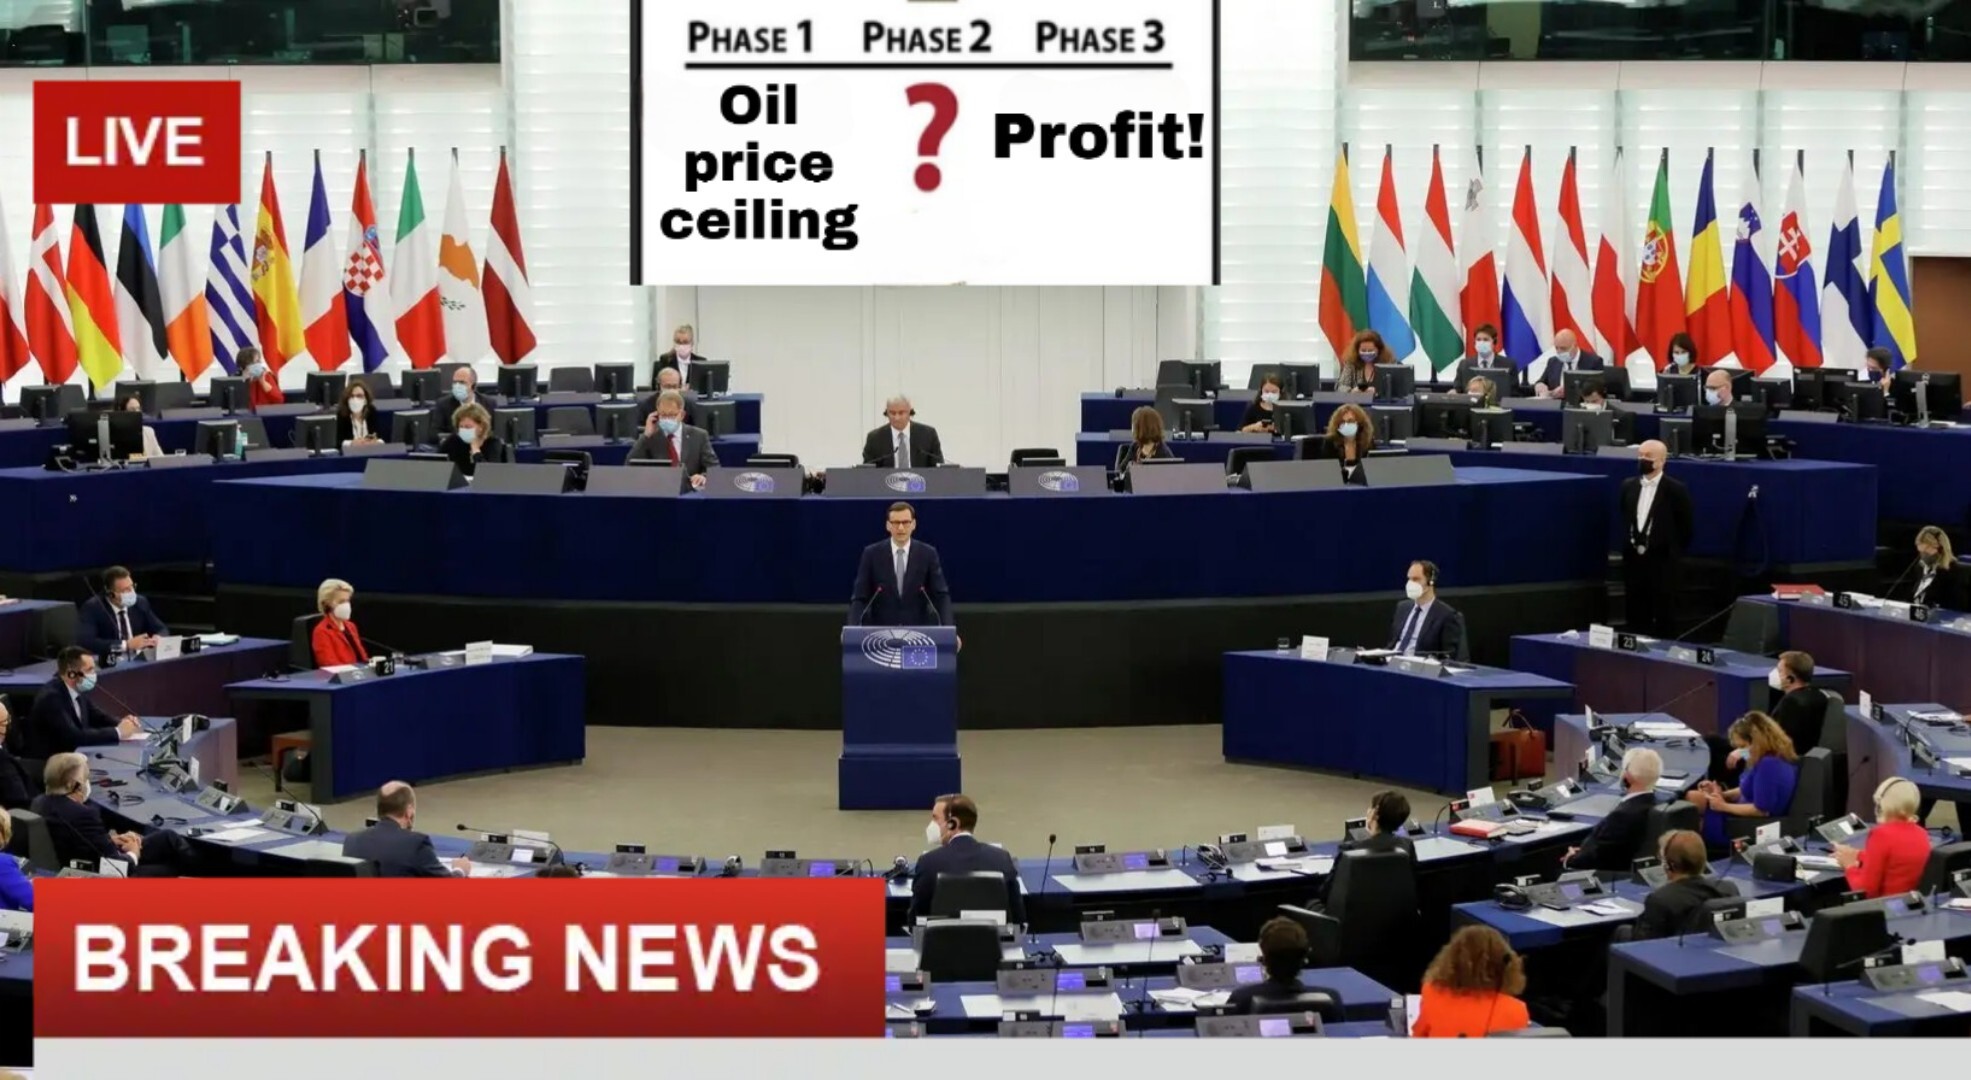 The EU explained the benefits of the oil price ceiling for European countries - Politics, Humor, Strange humor, Memes, Price ceiling